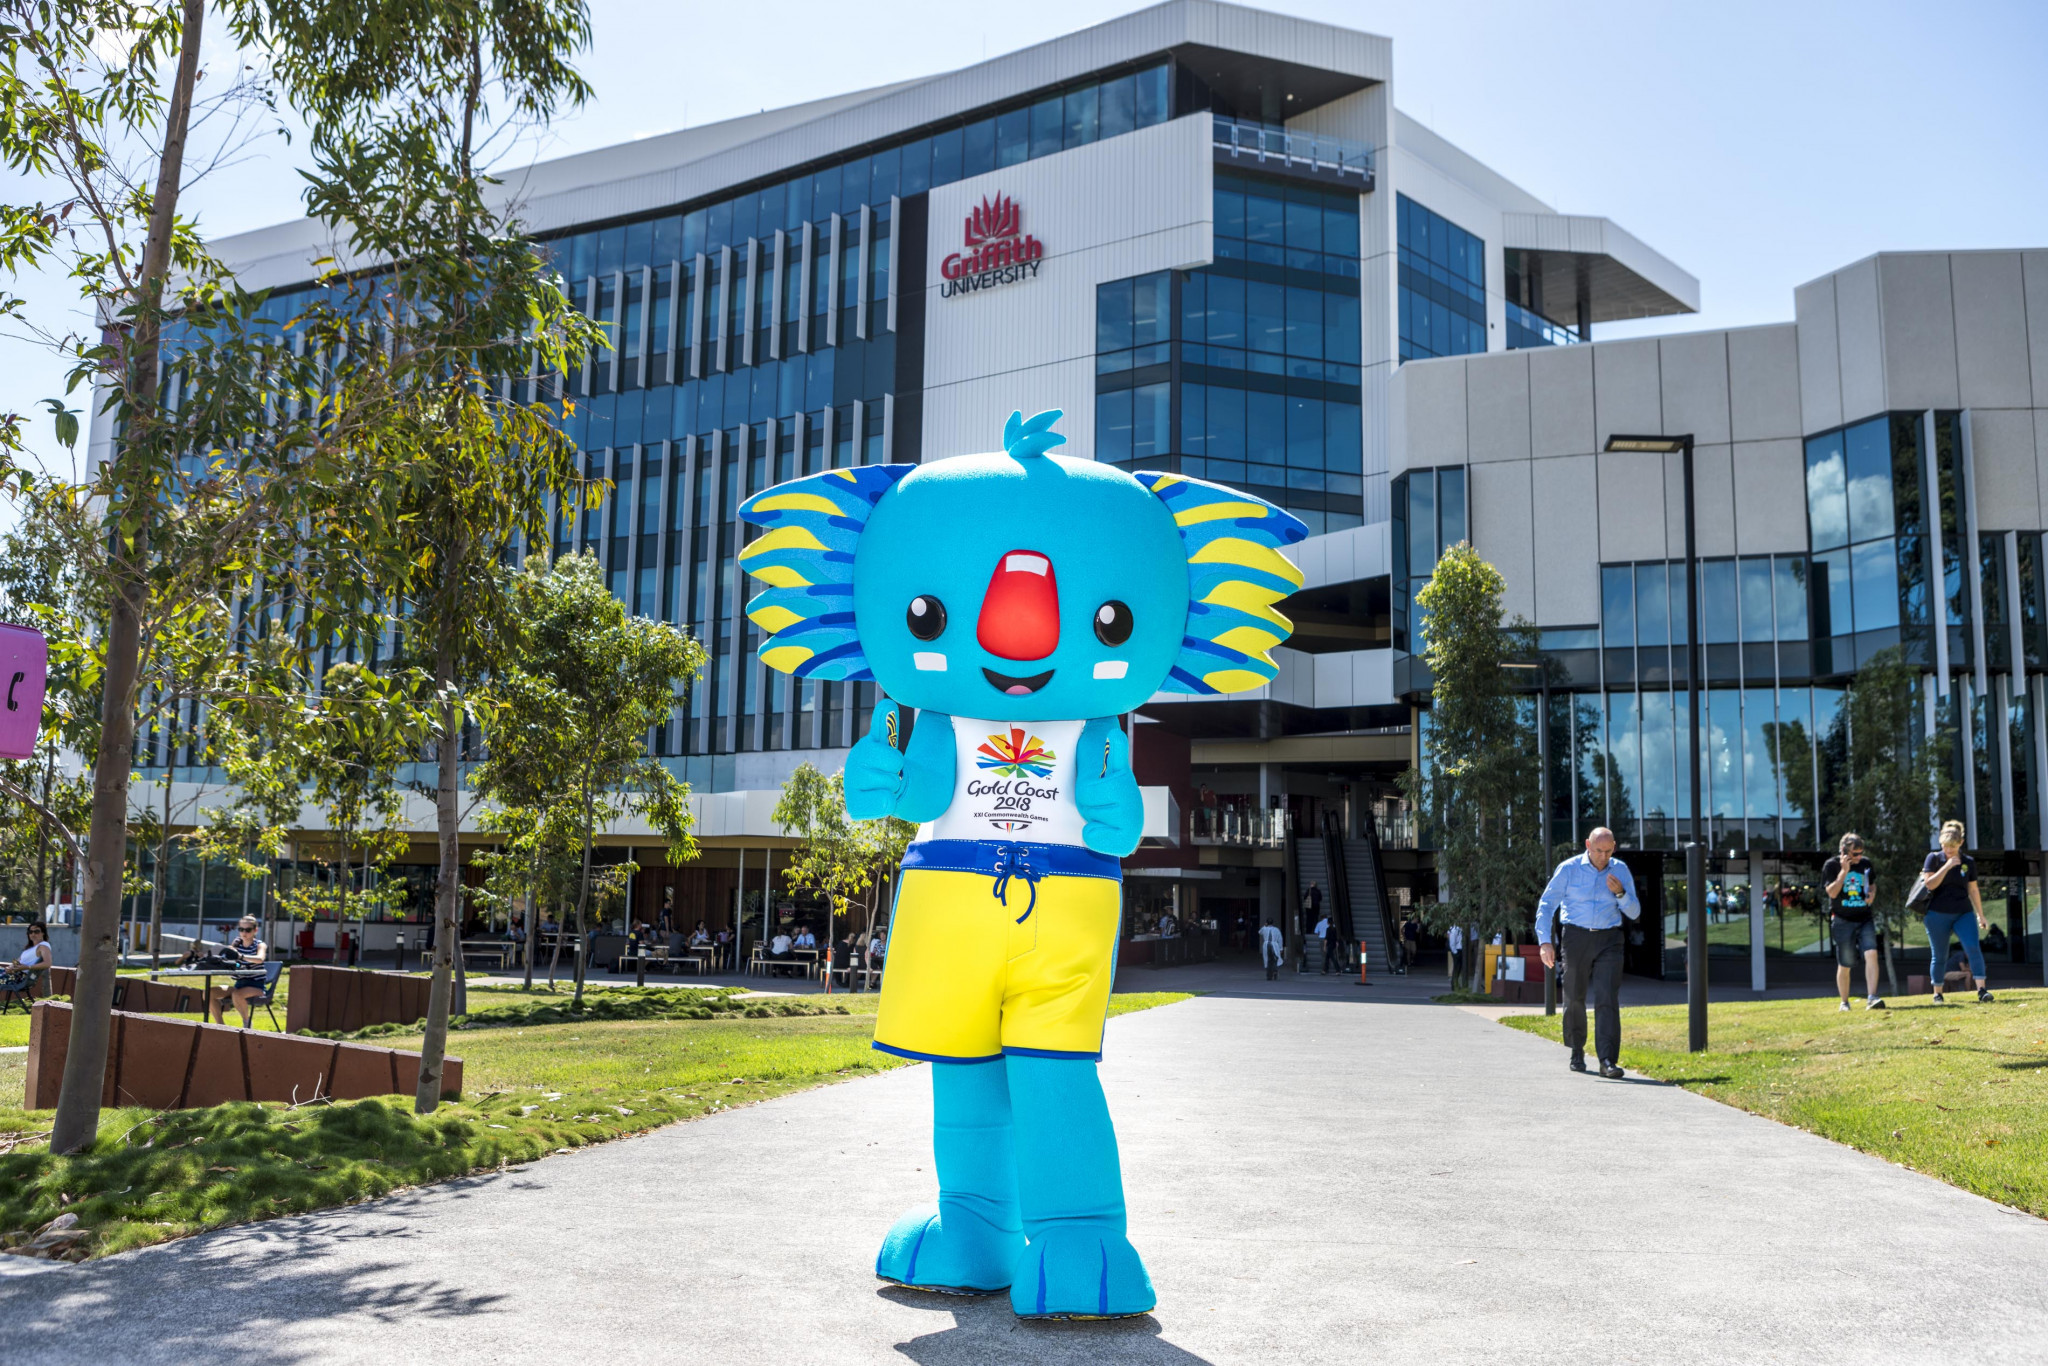 Griffith University was heavily involved in the 2018 Commonwealth Games in the Gold Coast and hopes to use some of these lessons during the build-up to Brisbane 2032 ©Griffith University